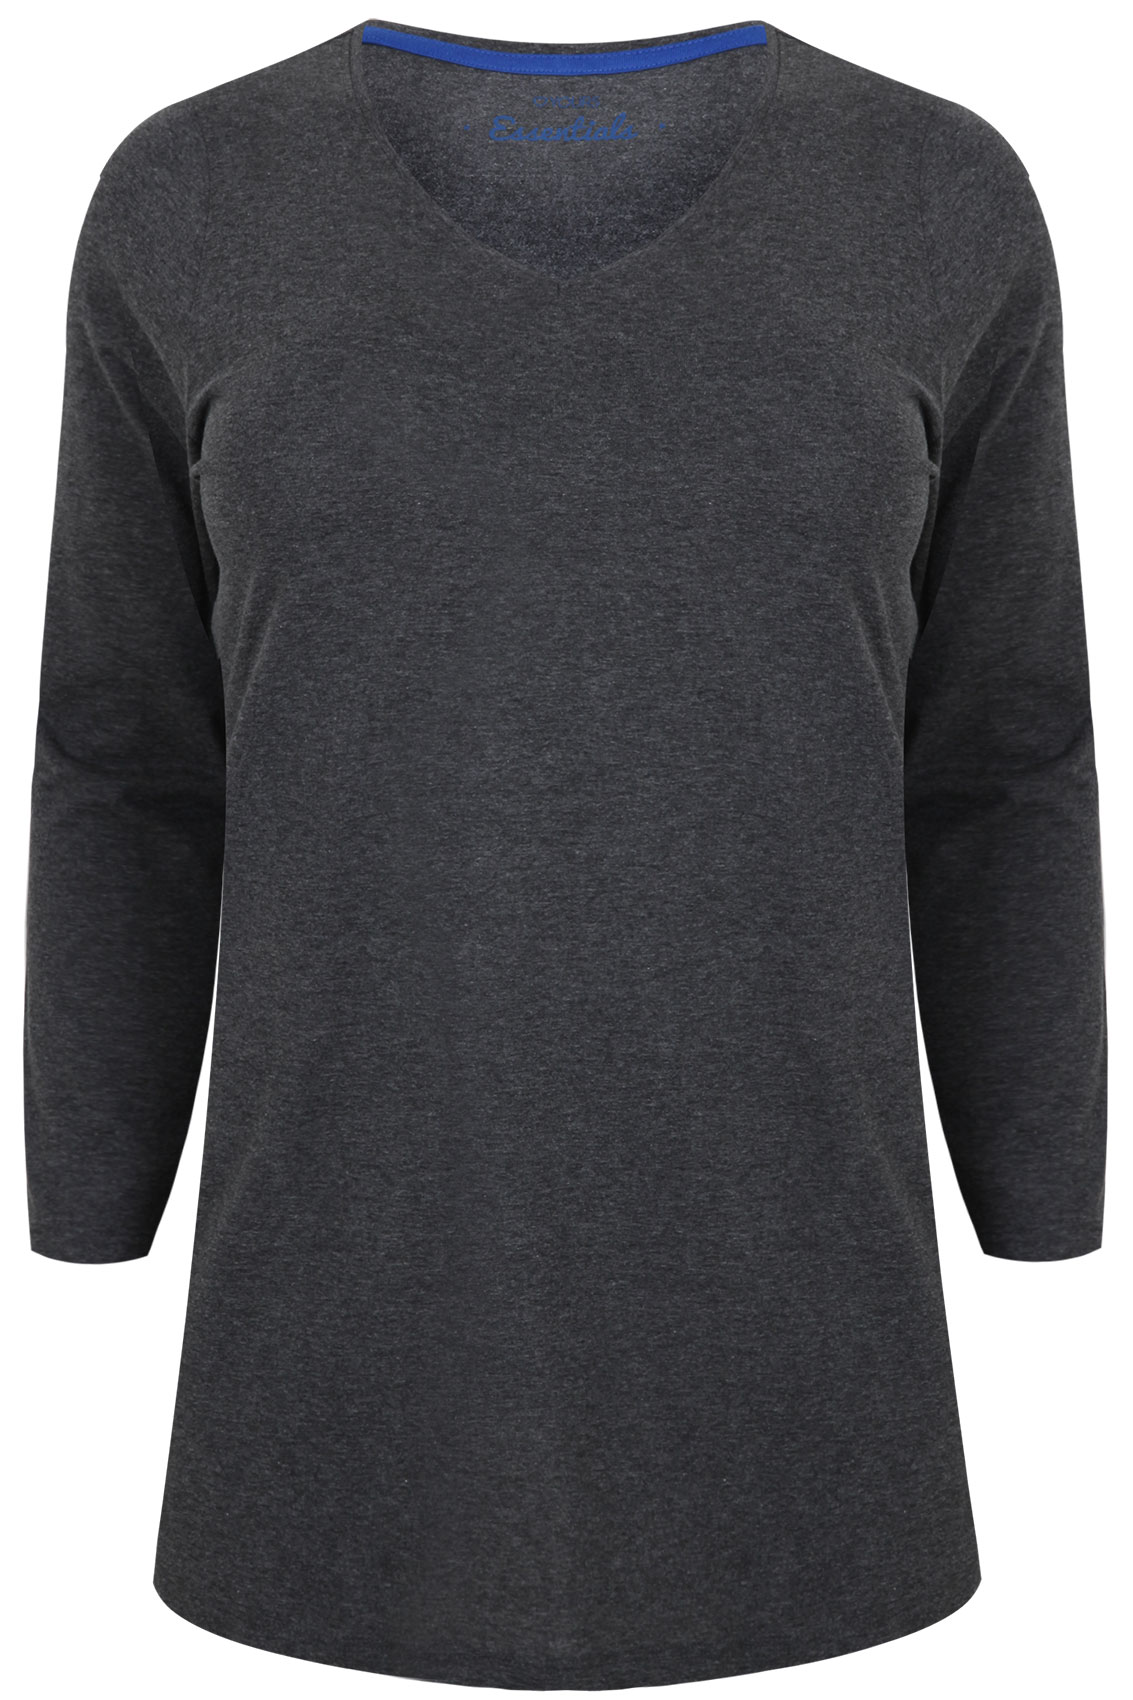 Download Grey Marl Long Sleeve V-Neck Plain T-Shirt Plus Size 16 to 36